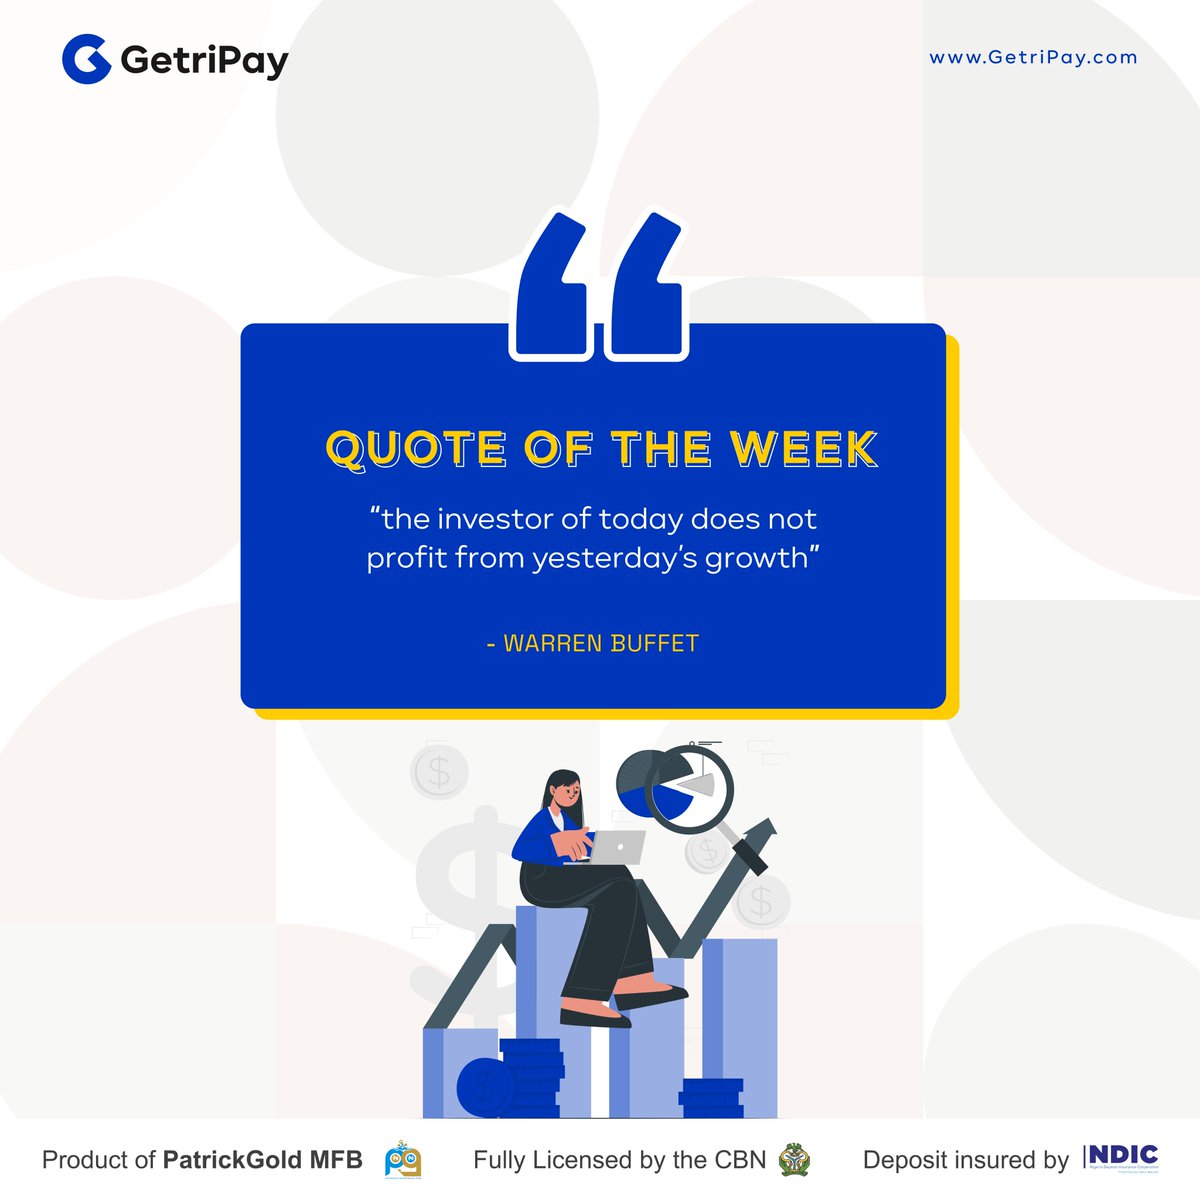 Invest wisely and think forward. #getripay #financialtips #finance #banking #moneytransfer #digital #DigitalBanking #quotestoliveby